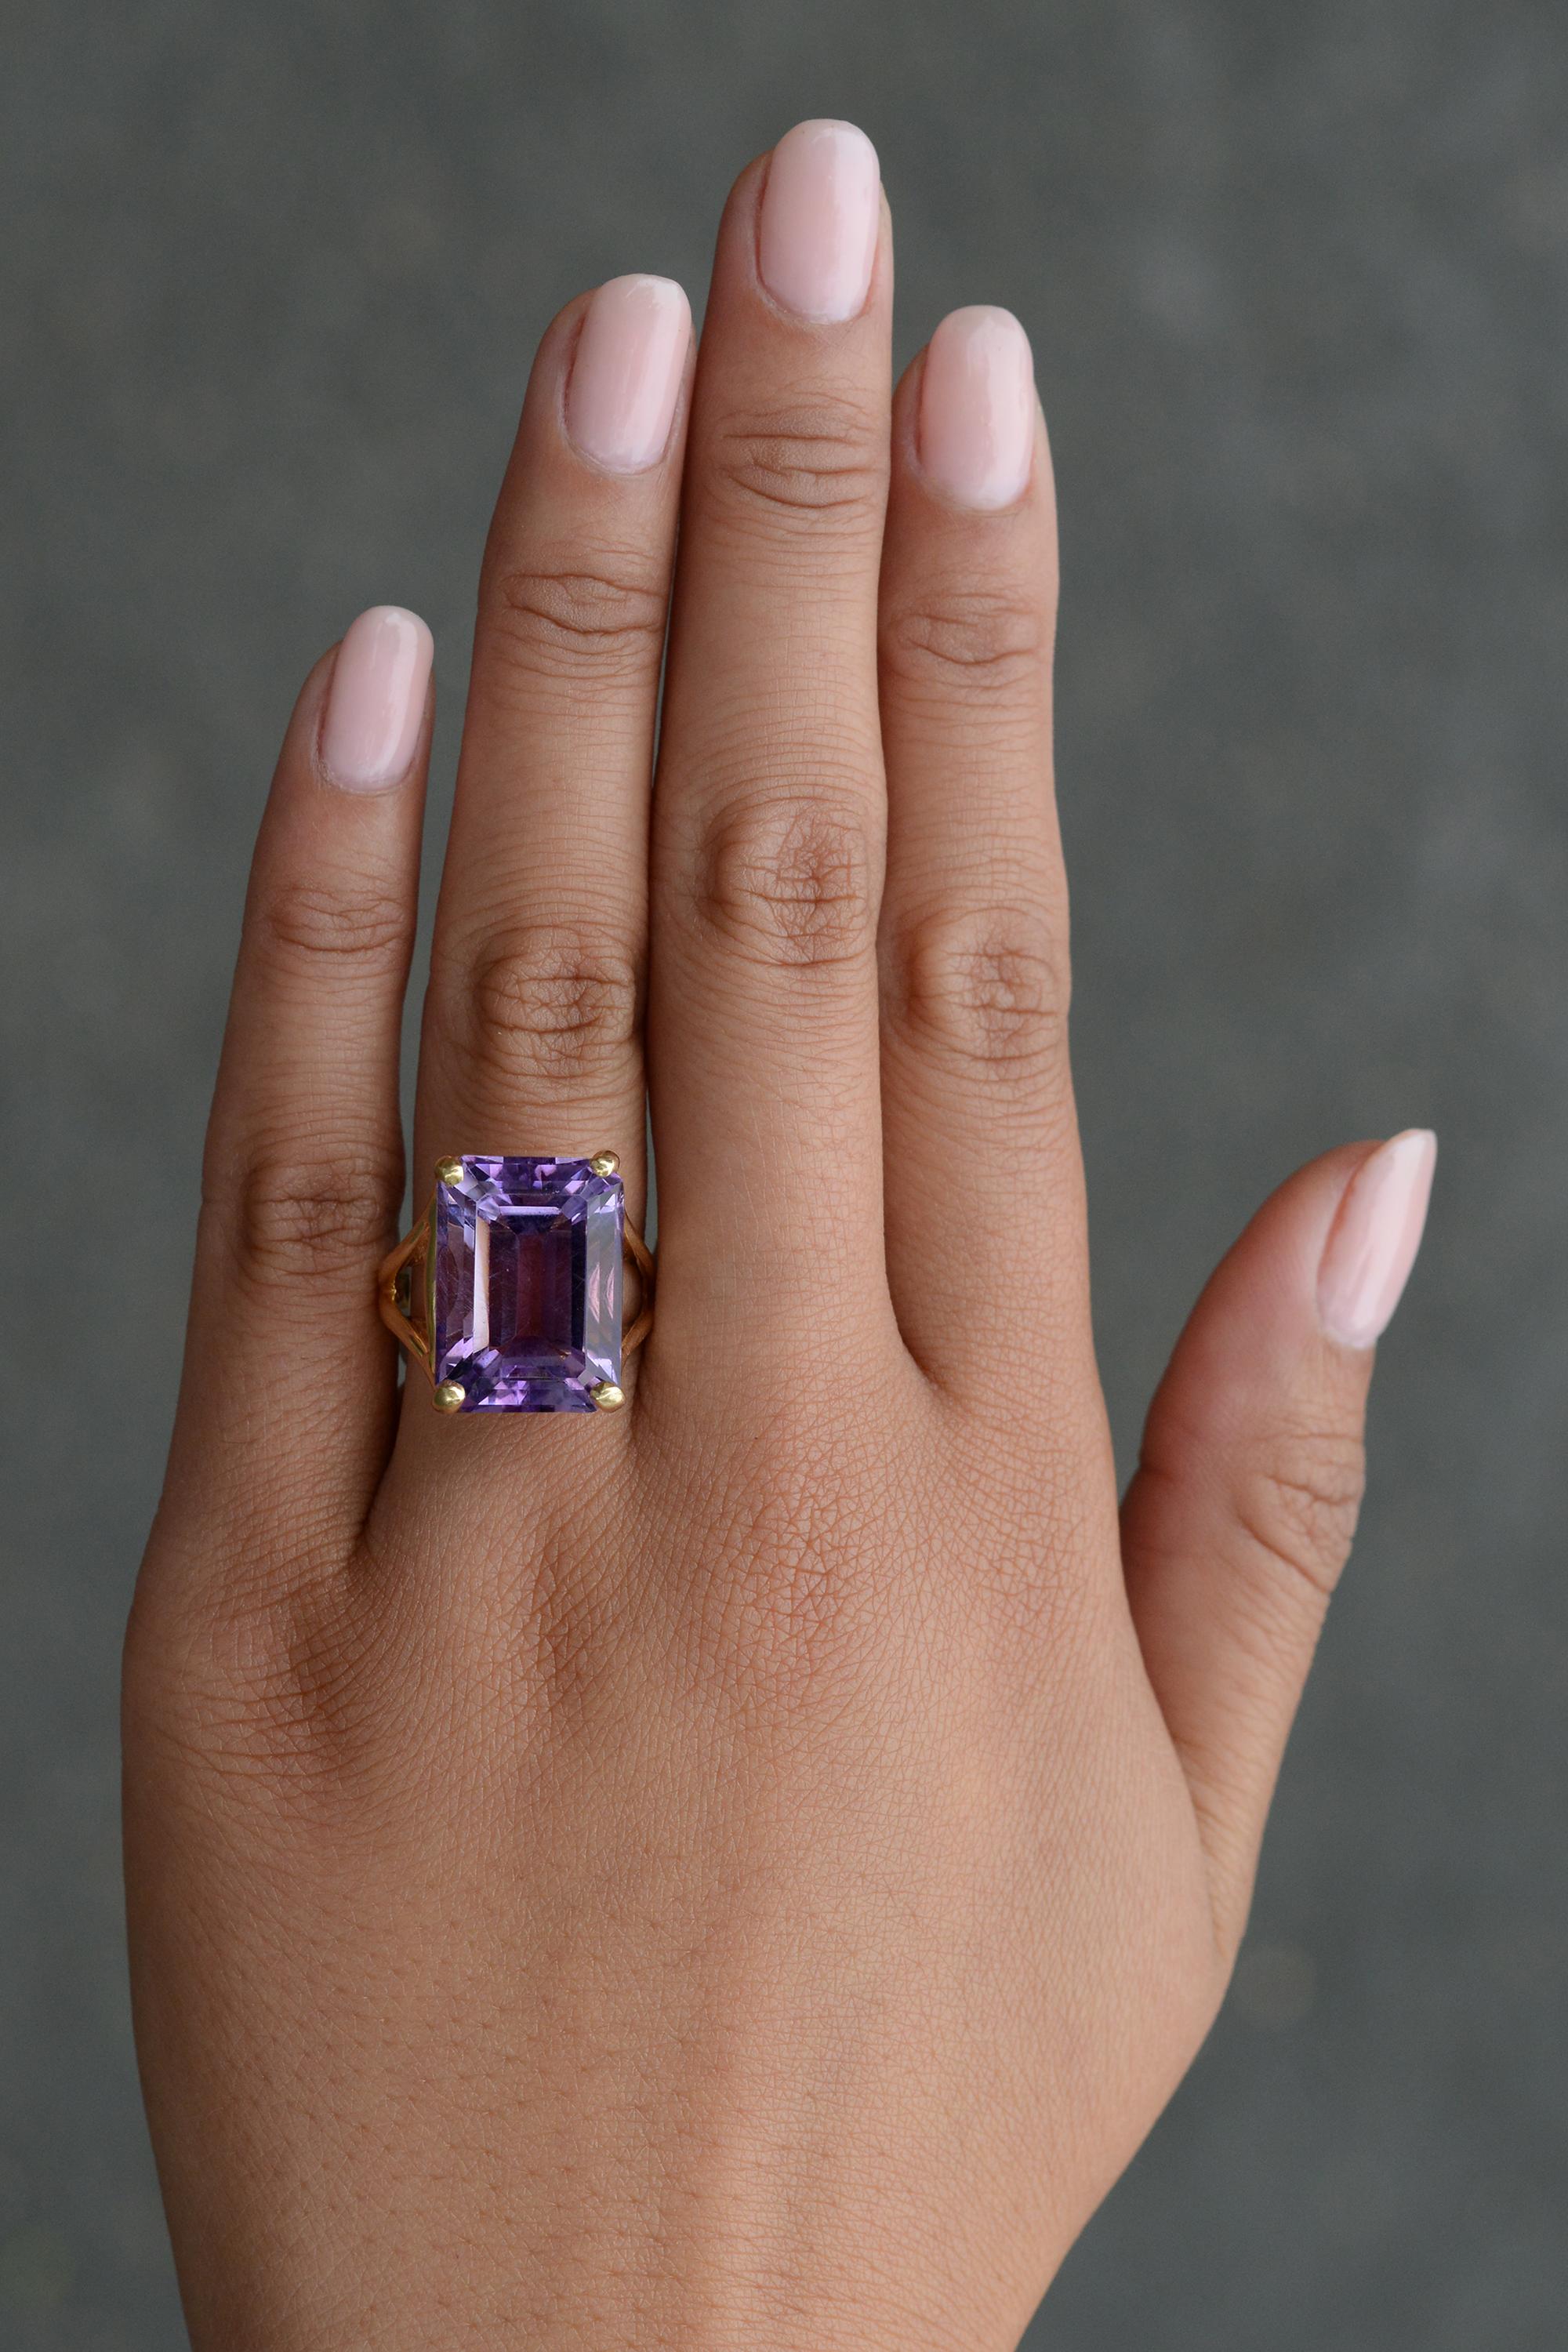 This luxurious estate cocktail ring is a rare find at an awesome value and perfect for your vintage collection. Bespoken with 14 karat yellow gold, and embellished with a dazzling and lovely-hued violet amethyst weighing 15 carats in a smart 